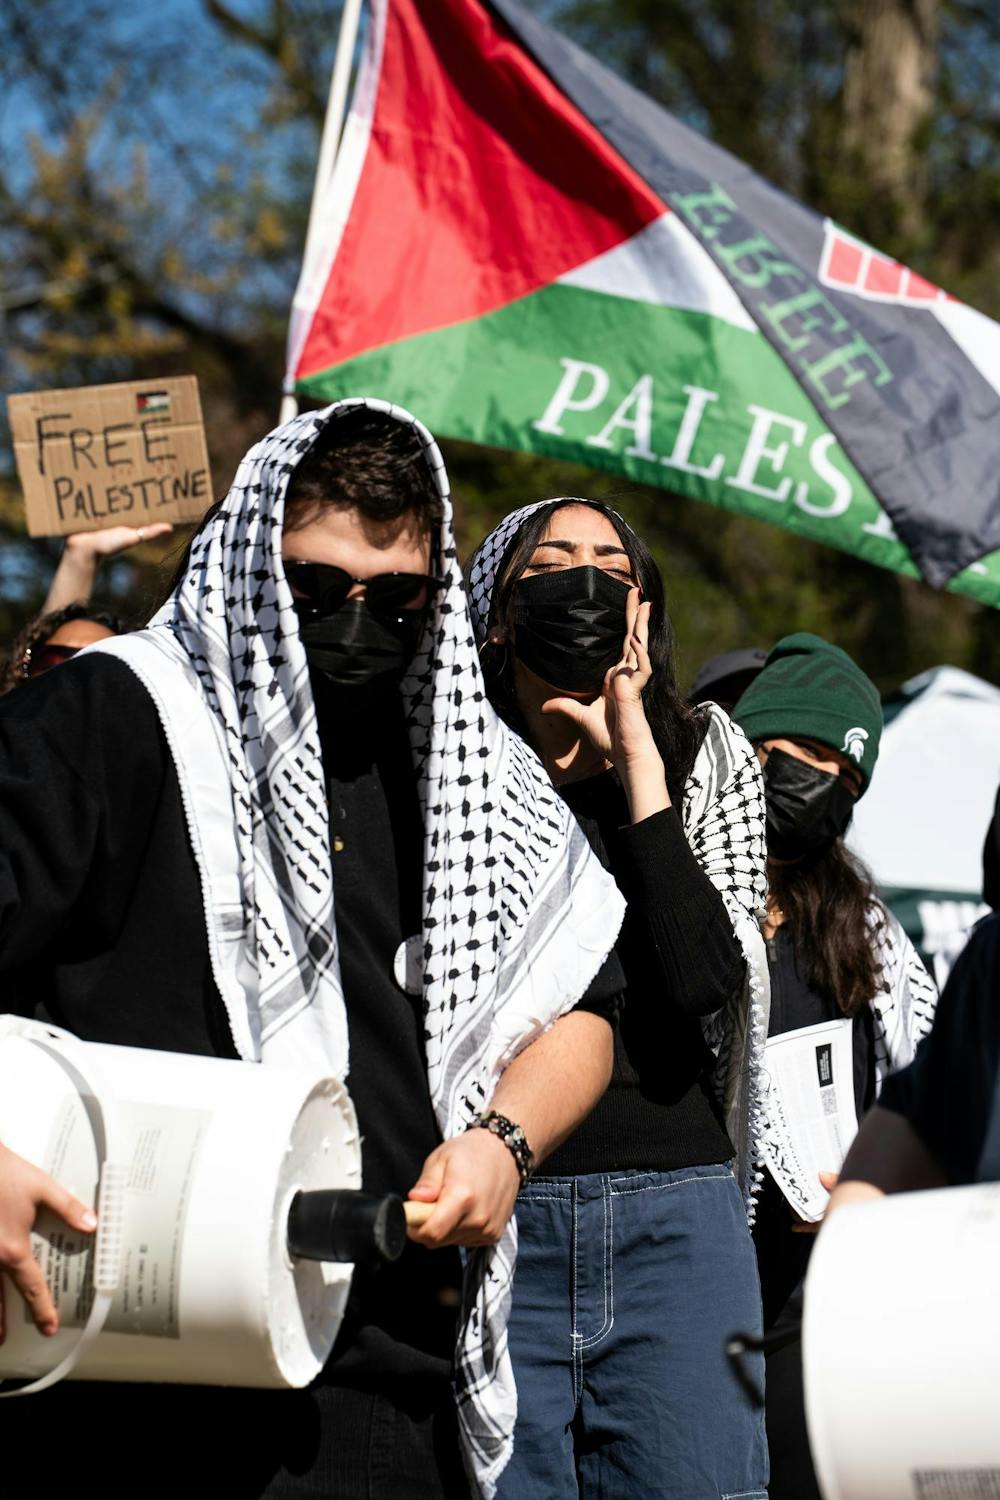 Michigan State University students and community members yell chants at the Gaza solidarity encampment in People’s Park on MSU’s campus on April 25, 2024.